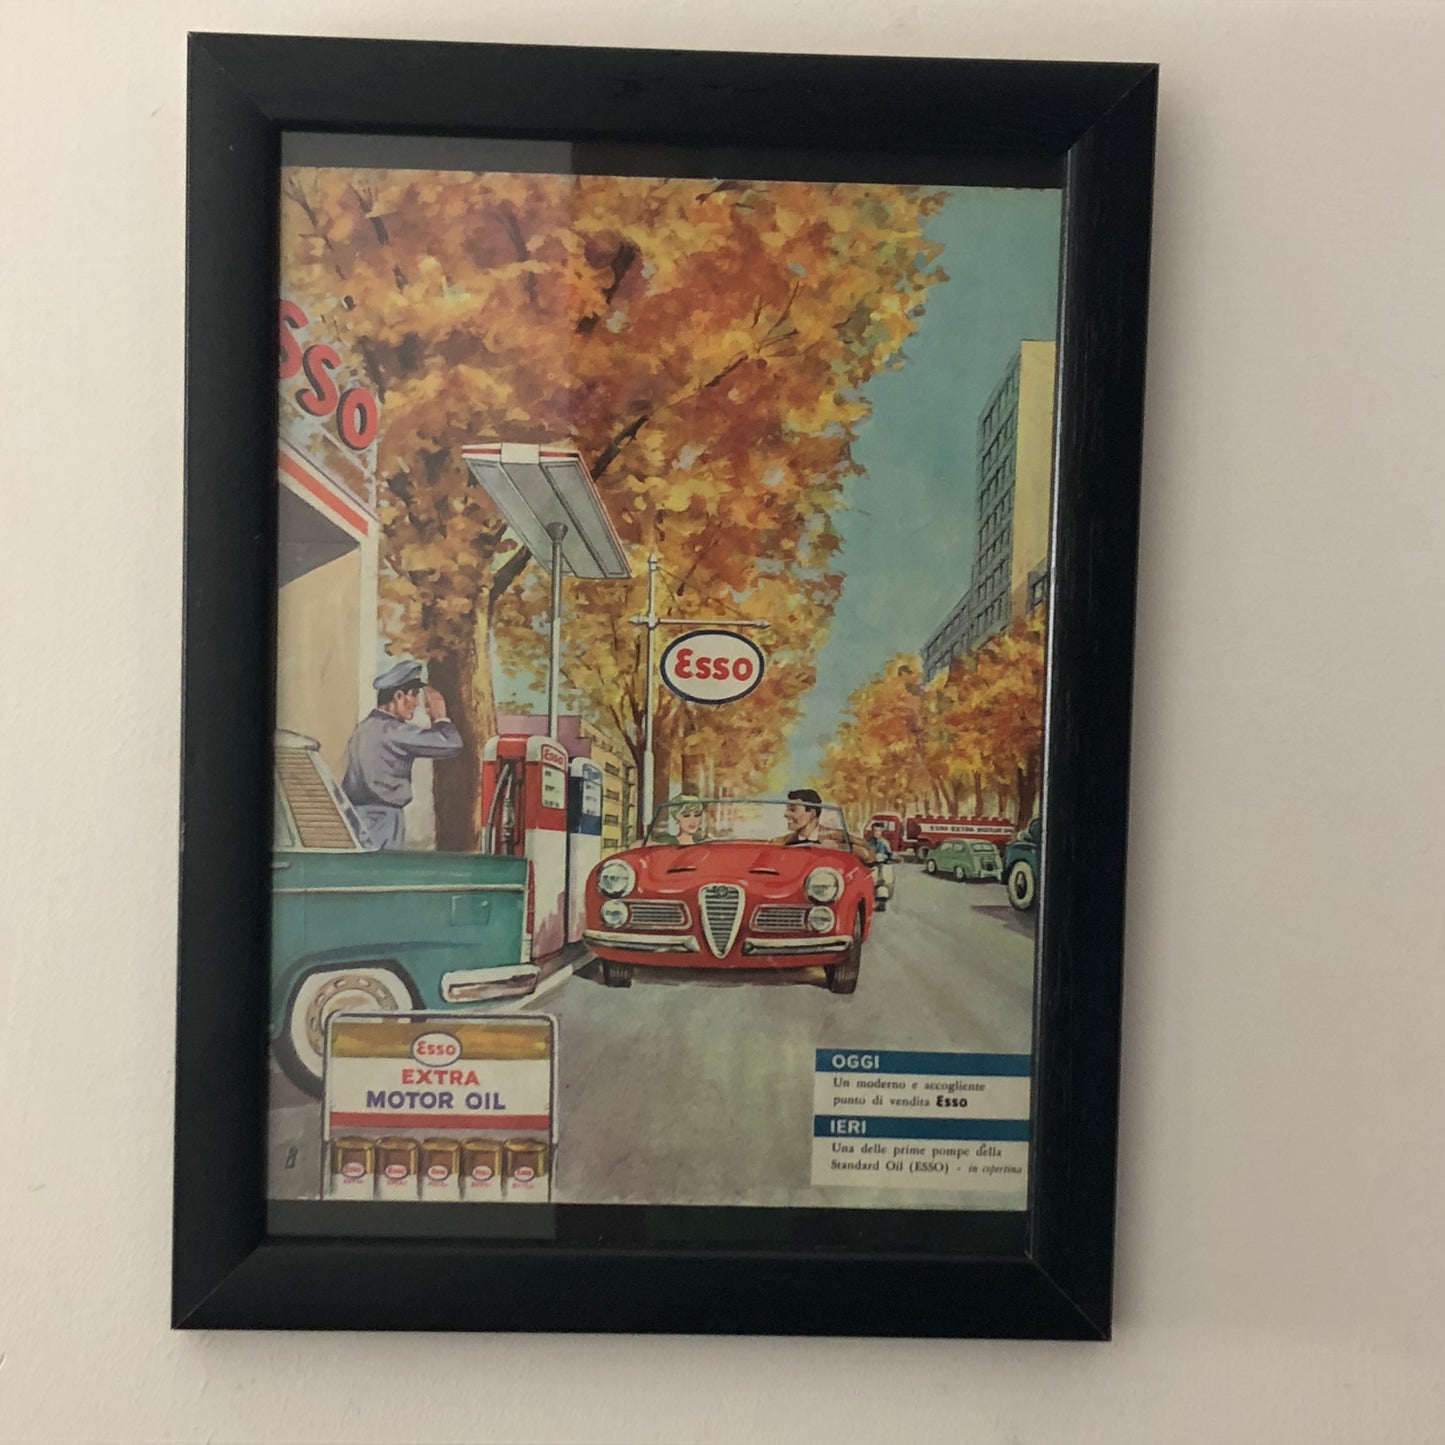 Esso, Advertisement Year 1960 Esso Service Station and Esso Extra Motor Oil